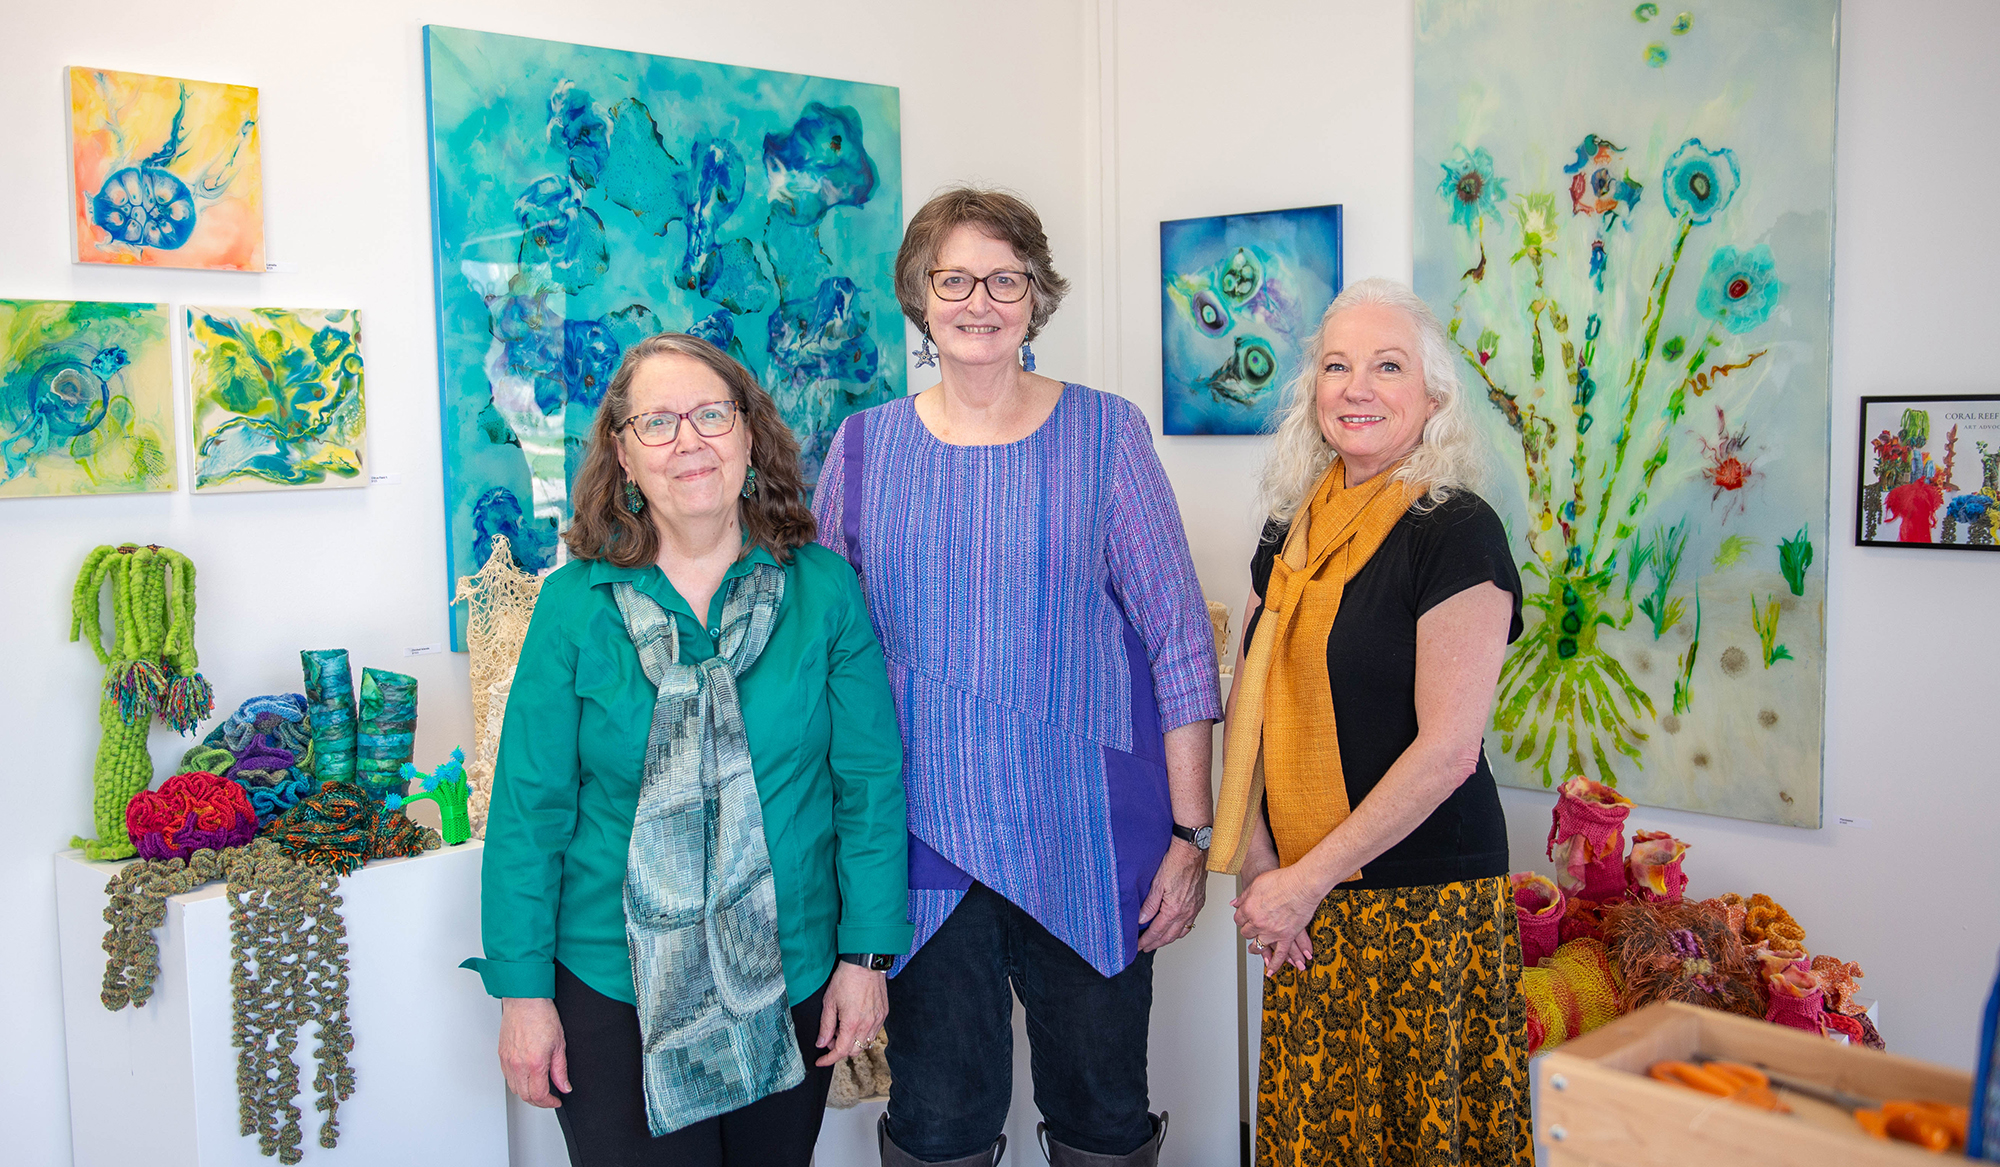 Miller, Hardy and Myre form a fiber arts community in Downtown Plano. Photo by Lauren Allen.